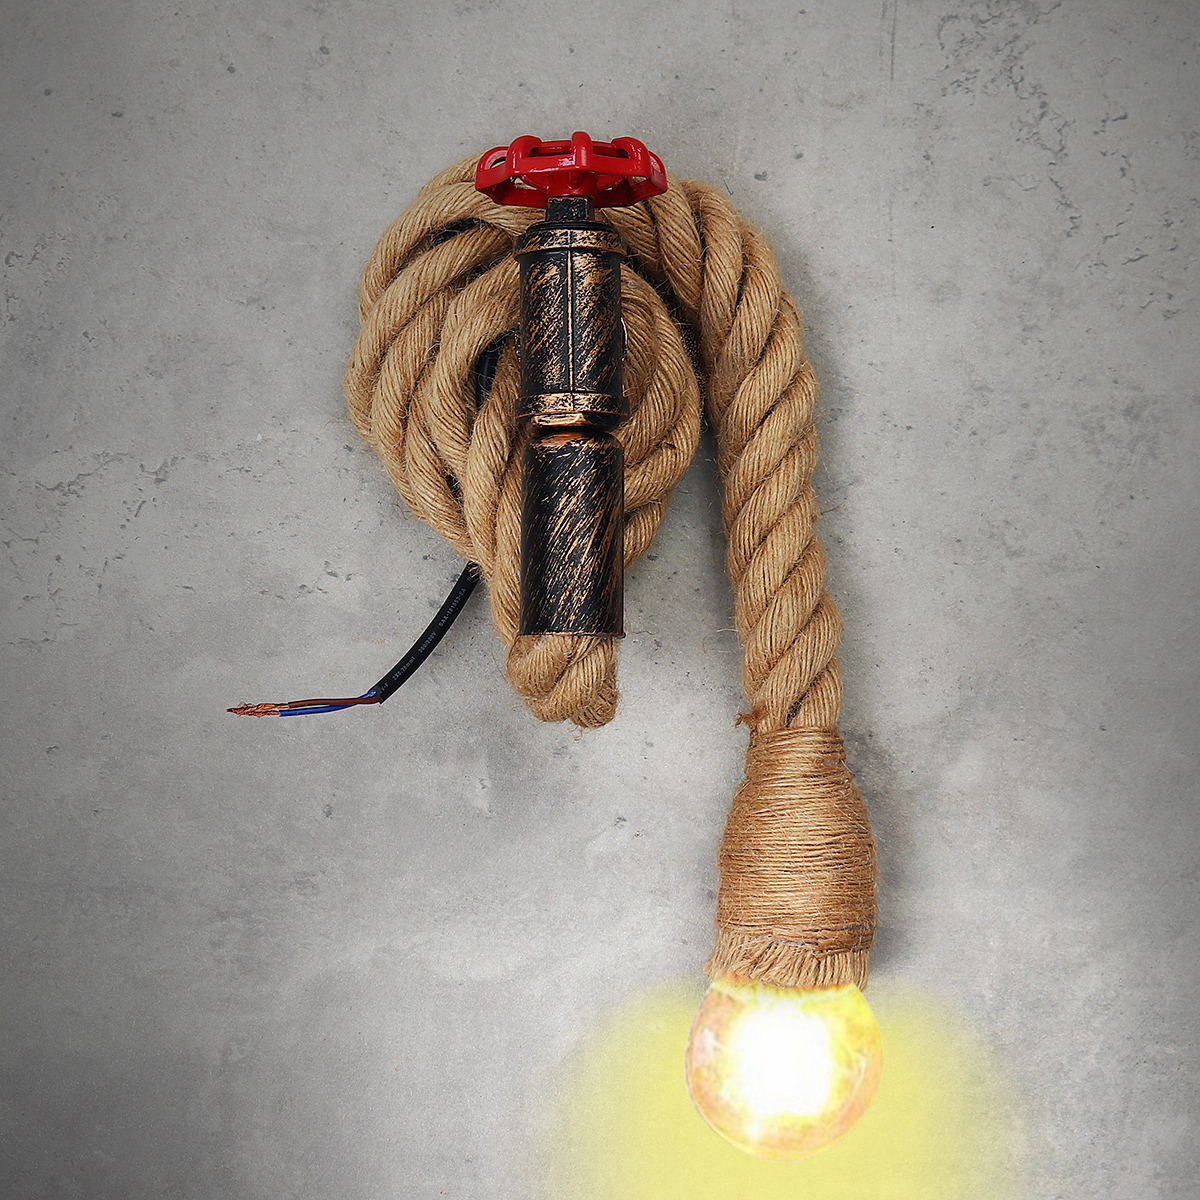 E27-Vintage-Industrial-Hemp-Rope-Pipe-Wall-Light-Lamp-Sconce-Fixture-Room-Decor-1646378-1